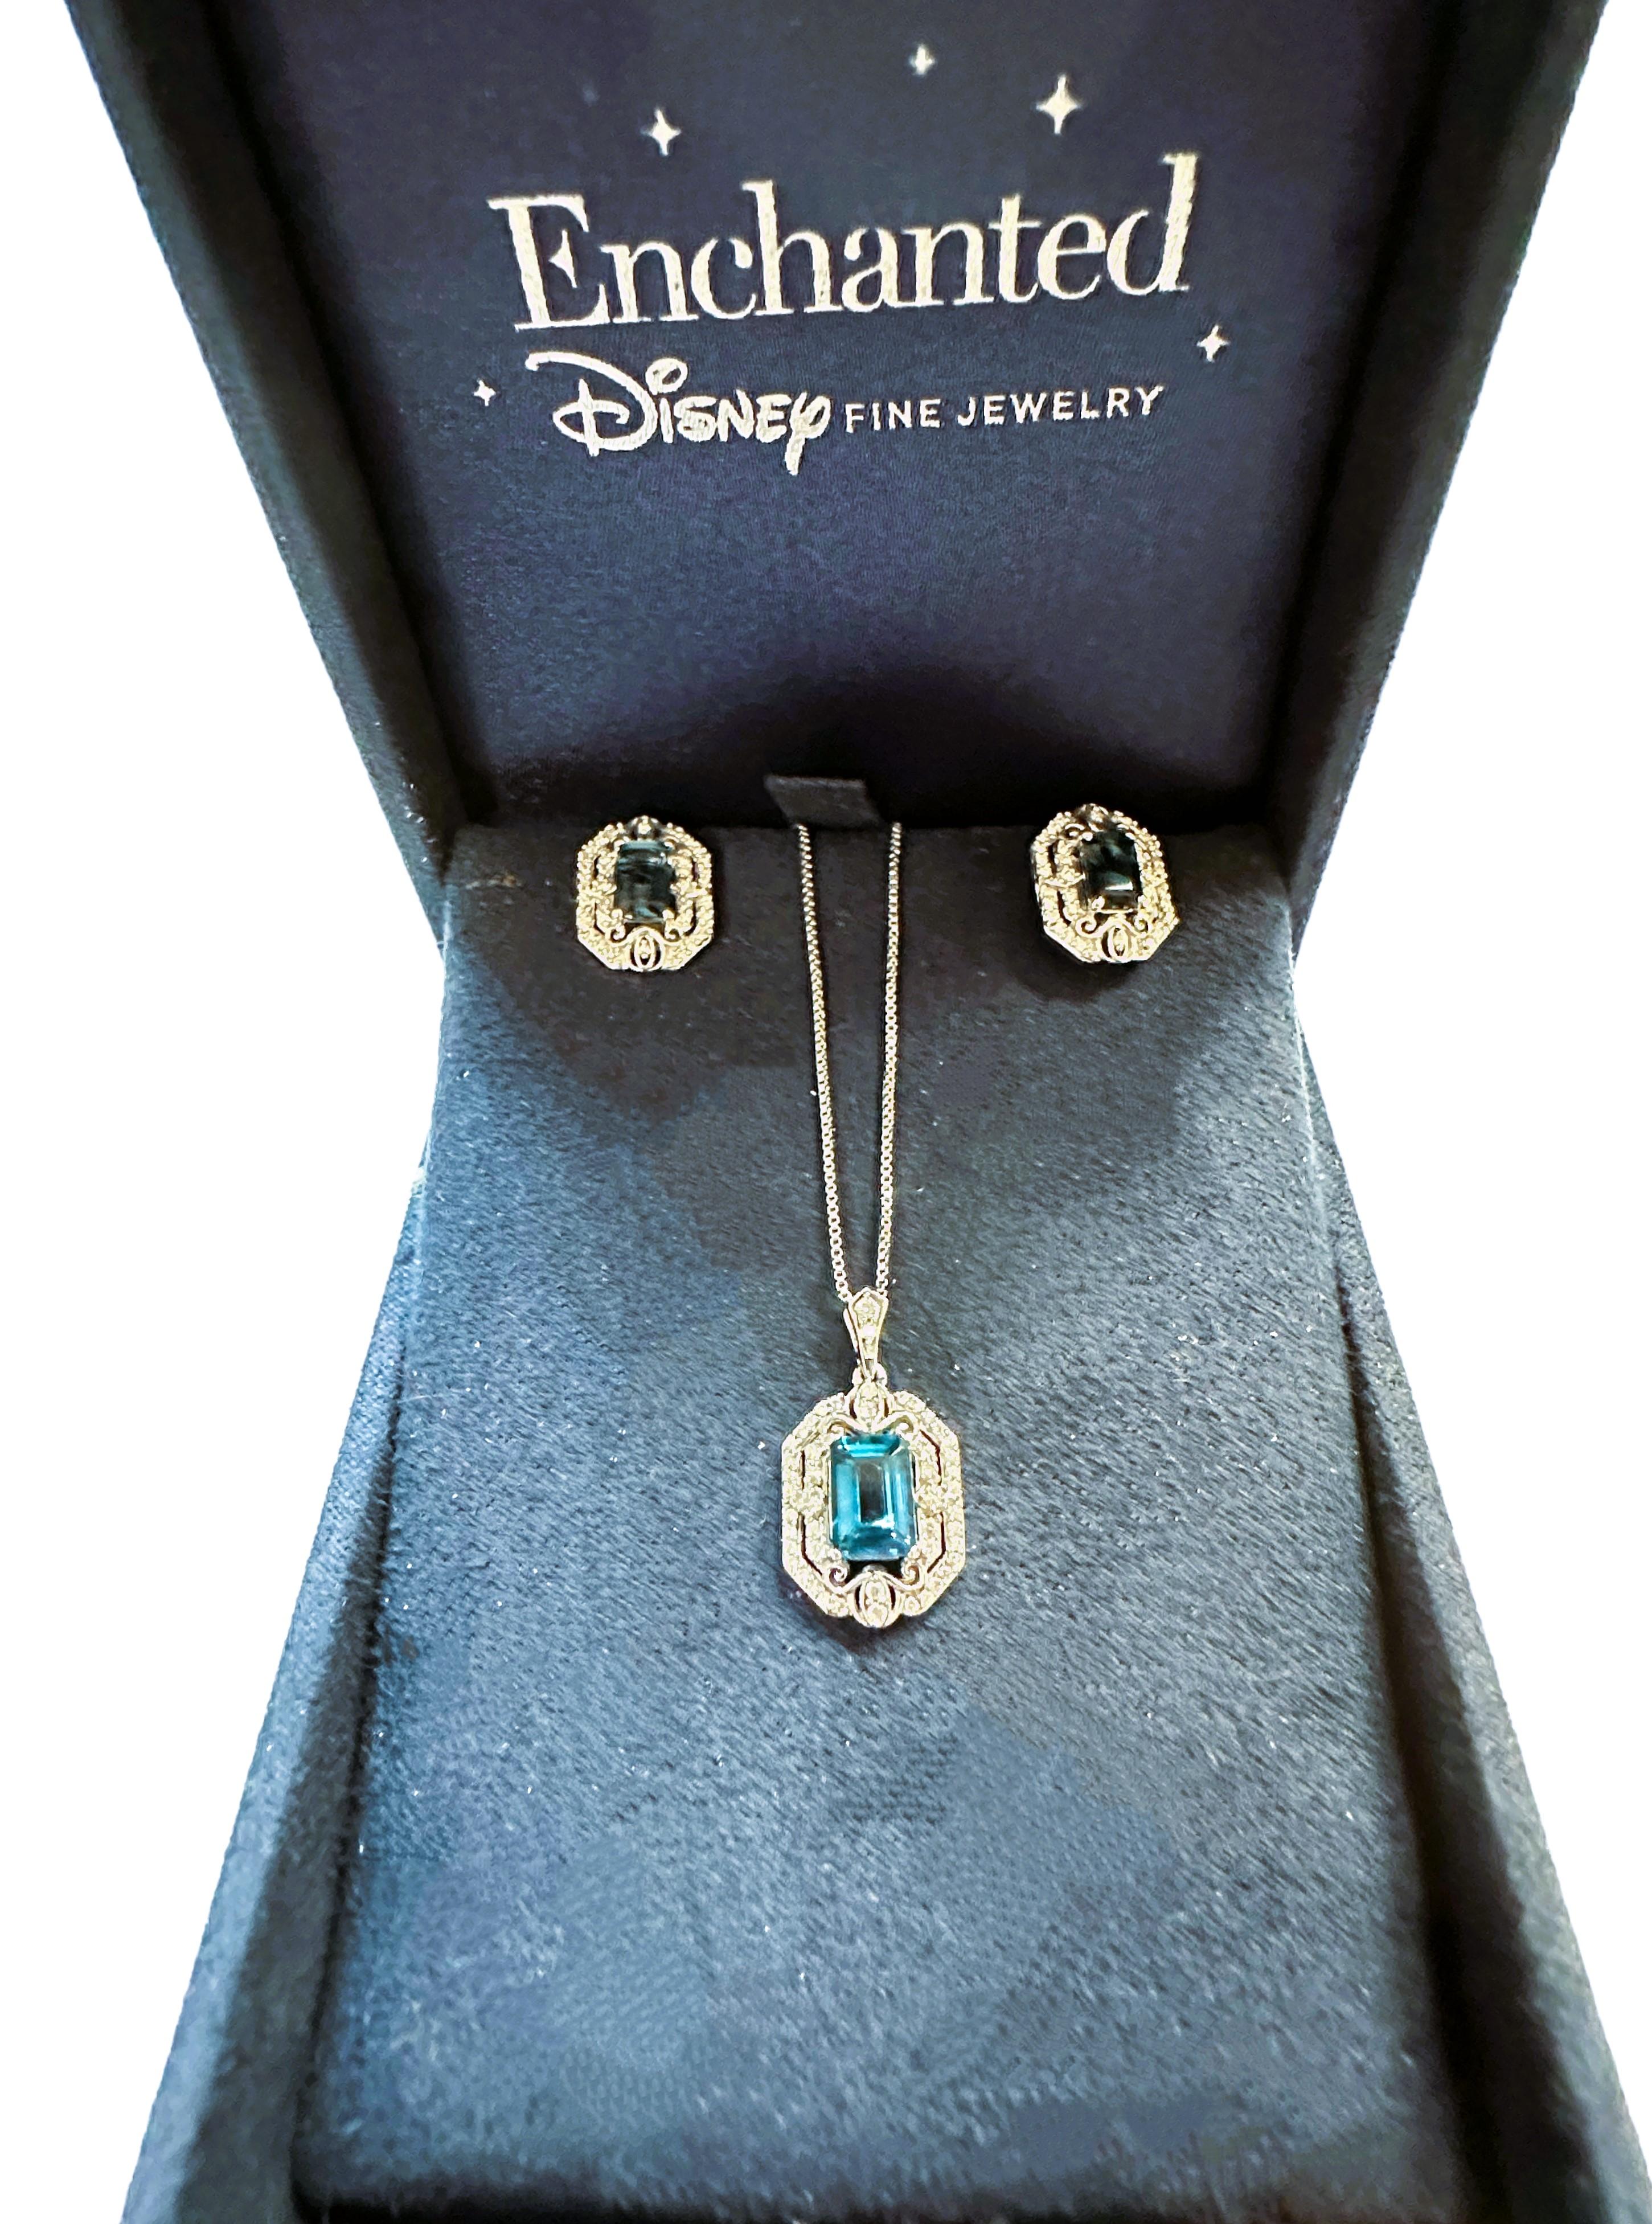 This is a beautiful Necklace and Earring set by Disney Enchanted.  It comes in the original box.  The chain is 18 inches long and the pendant plus bail is .88 inches long and .50 inches wide.  It's just a beautiful design. It has a beautiful Emerald